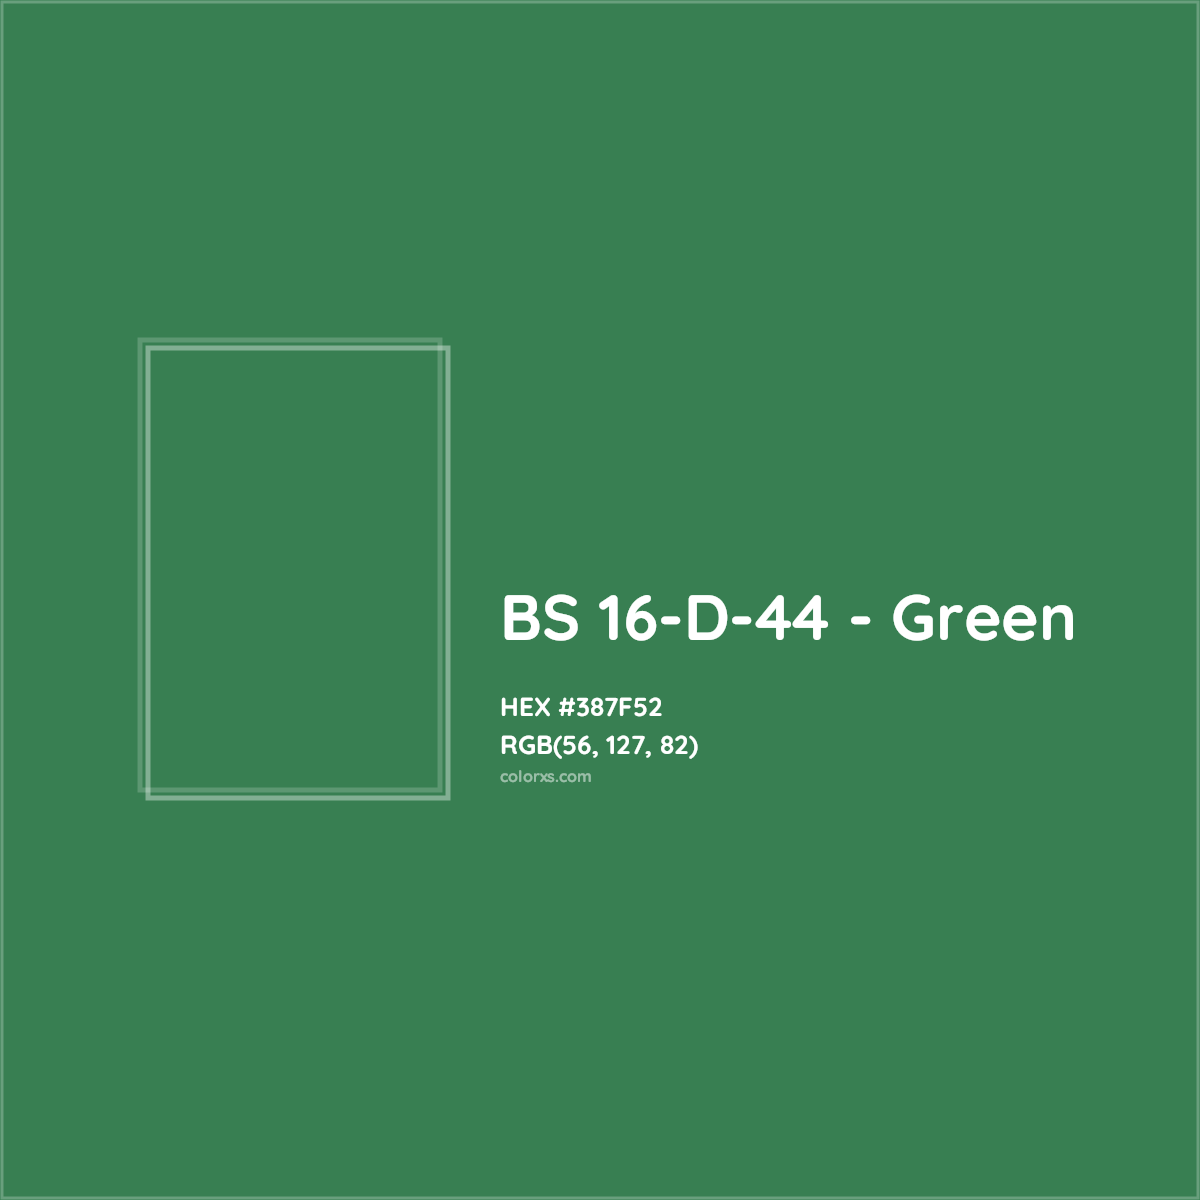 HEX #387F52 BS 16-D-44 - Green CMS British Standard 4800 - Color Code